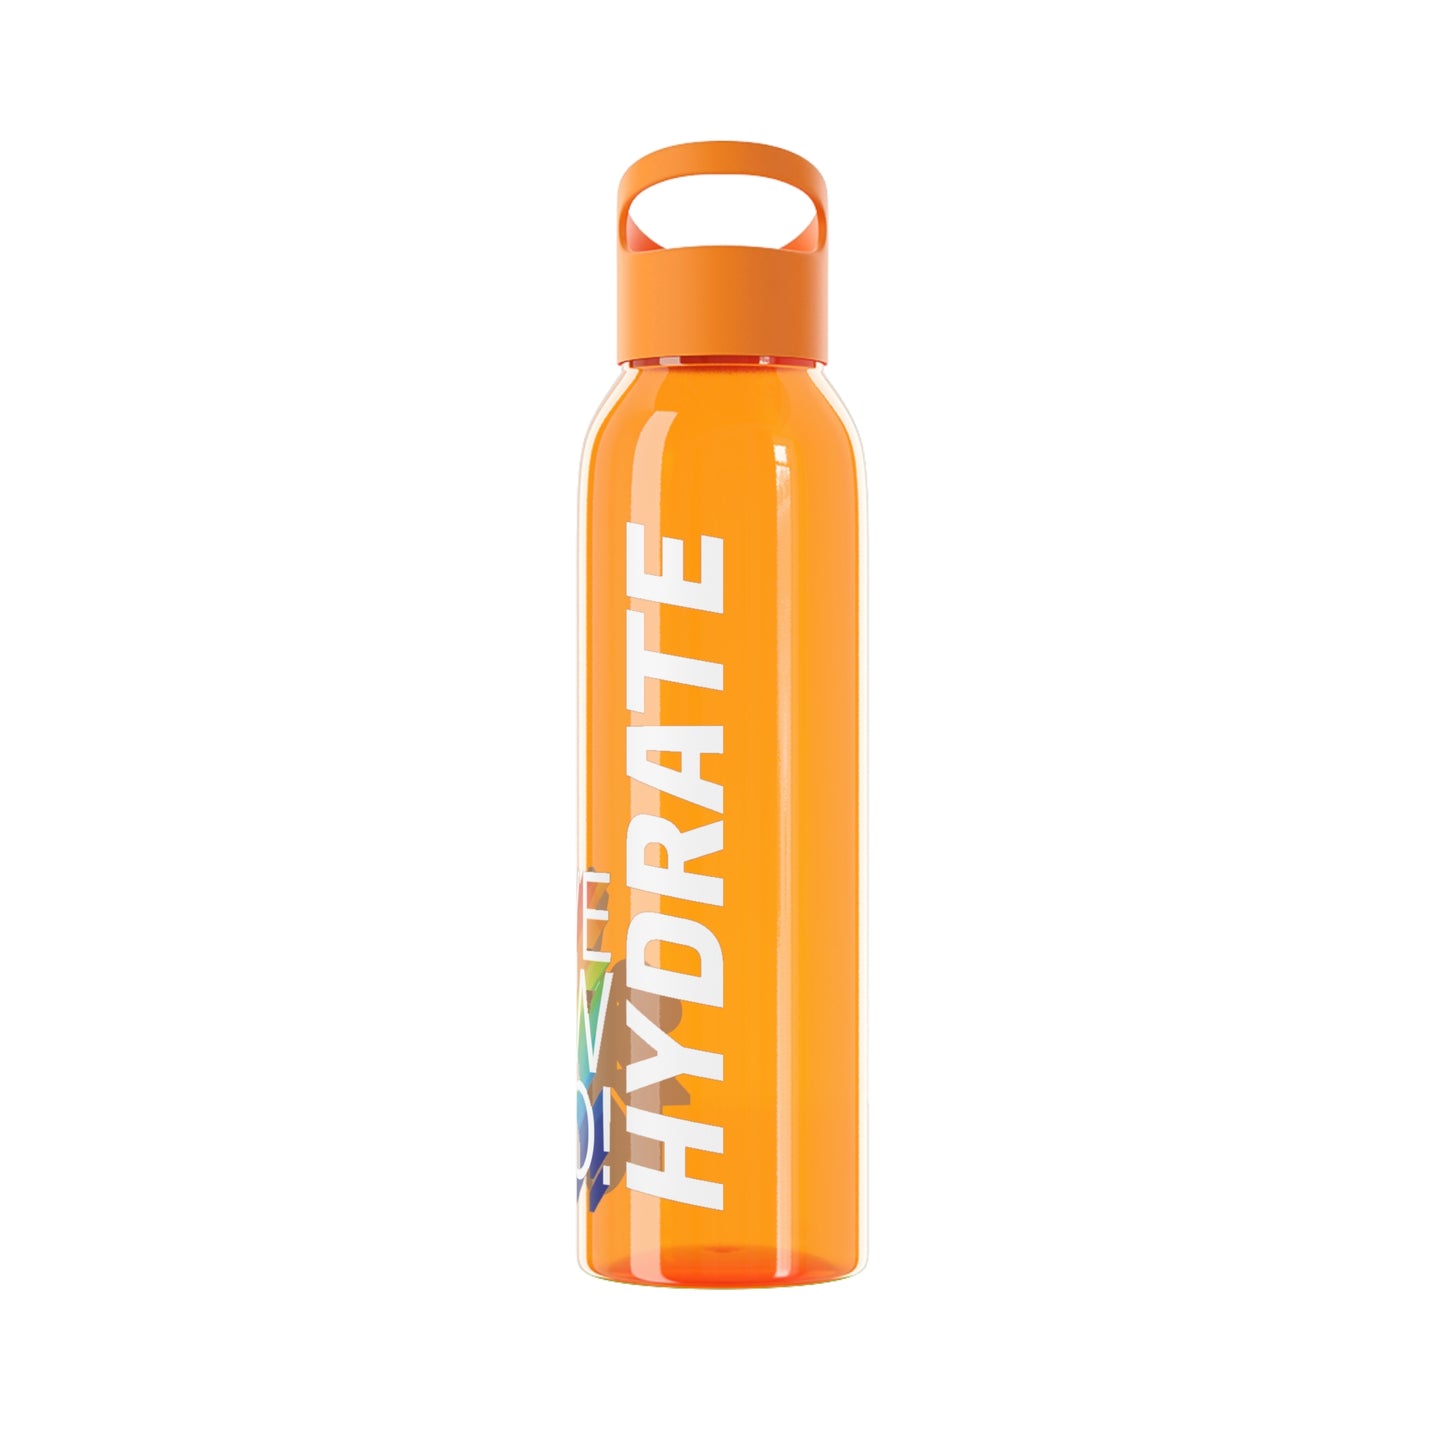 We Sew Too Hydrate water bottle